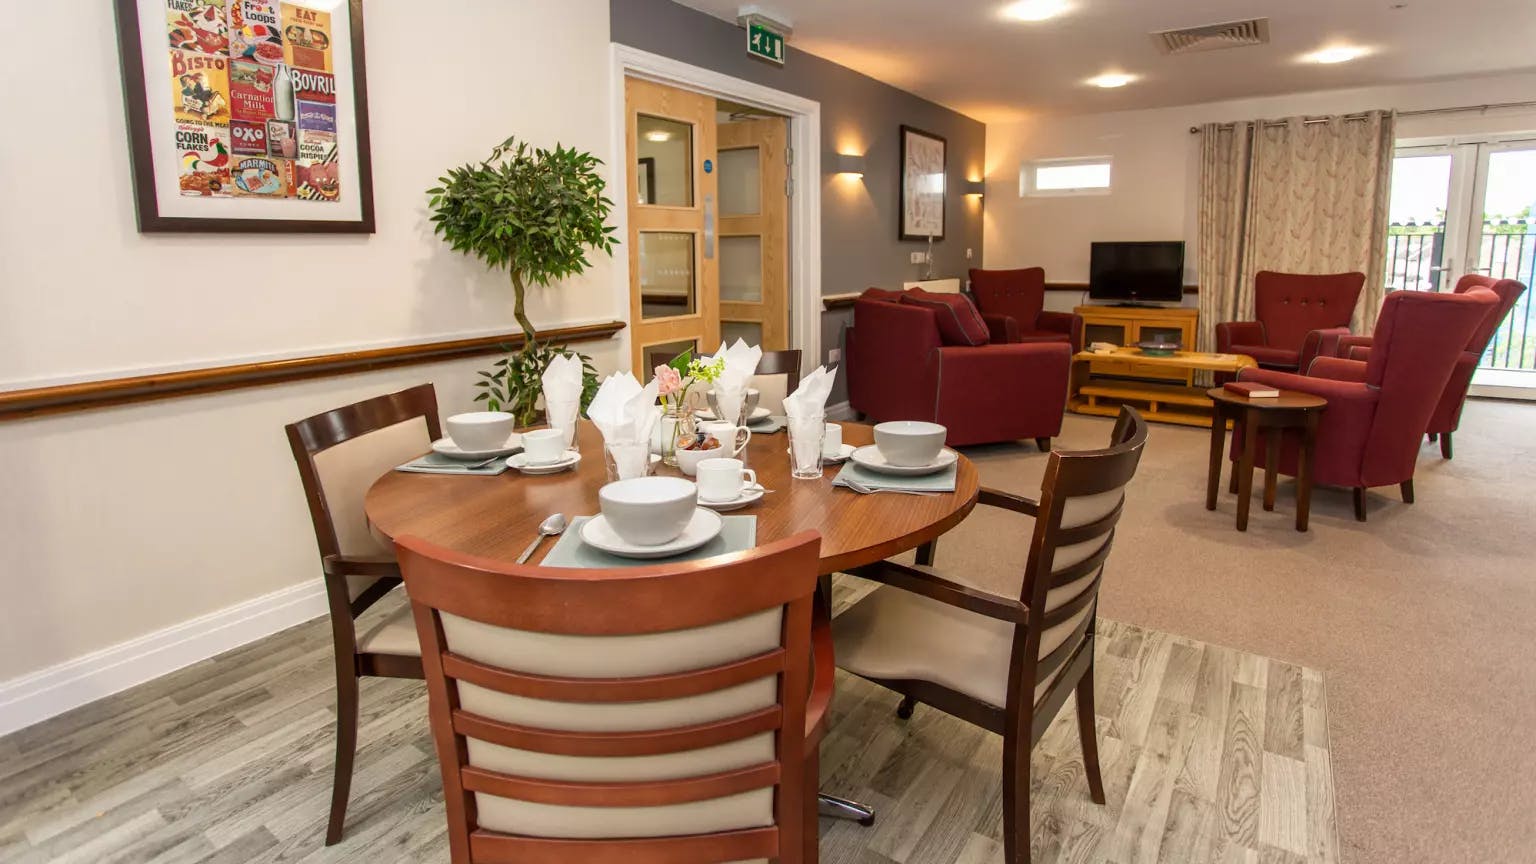 Dining room of Dukeminster Court care home in Dunstable, Bedfordshire